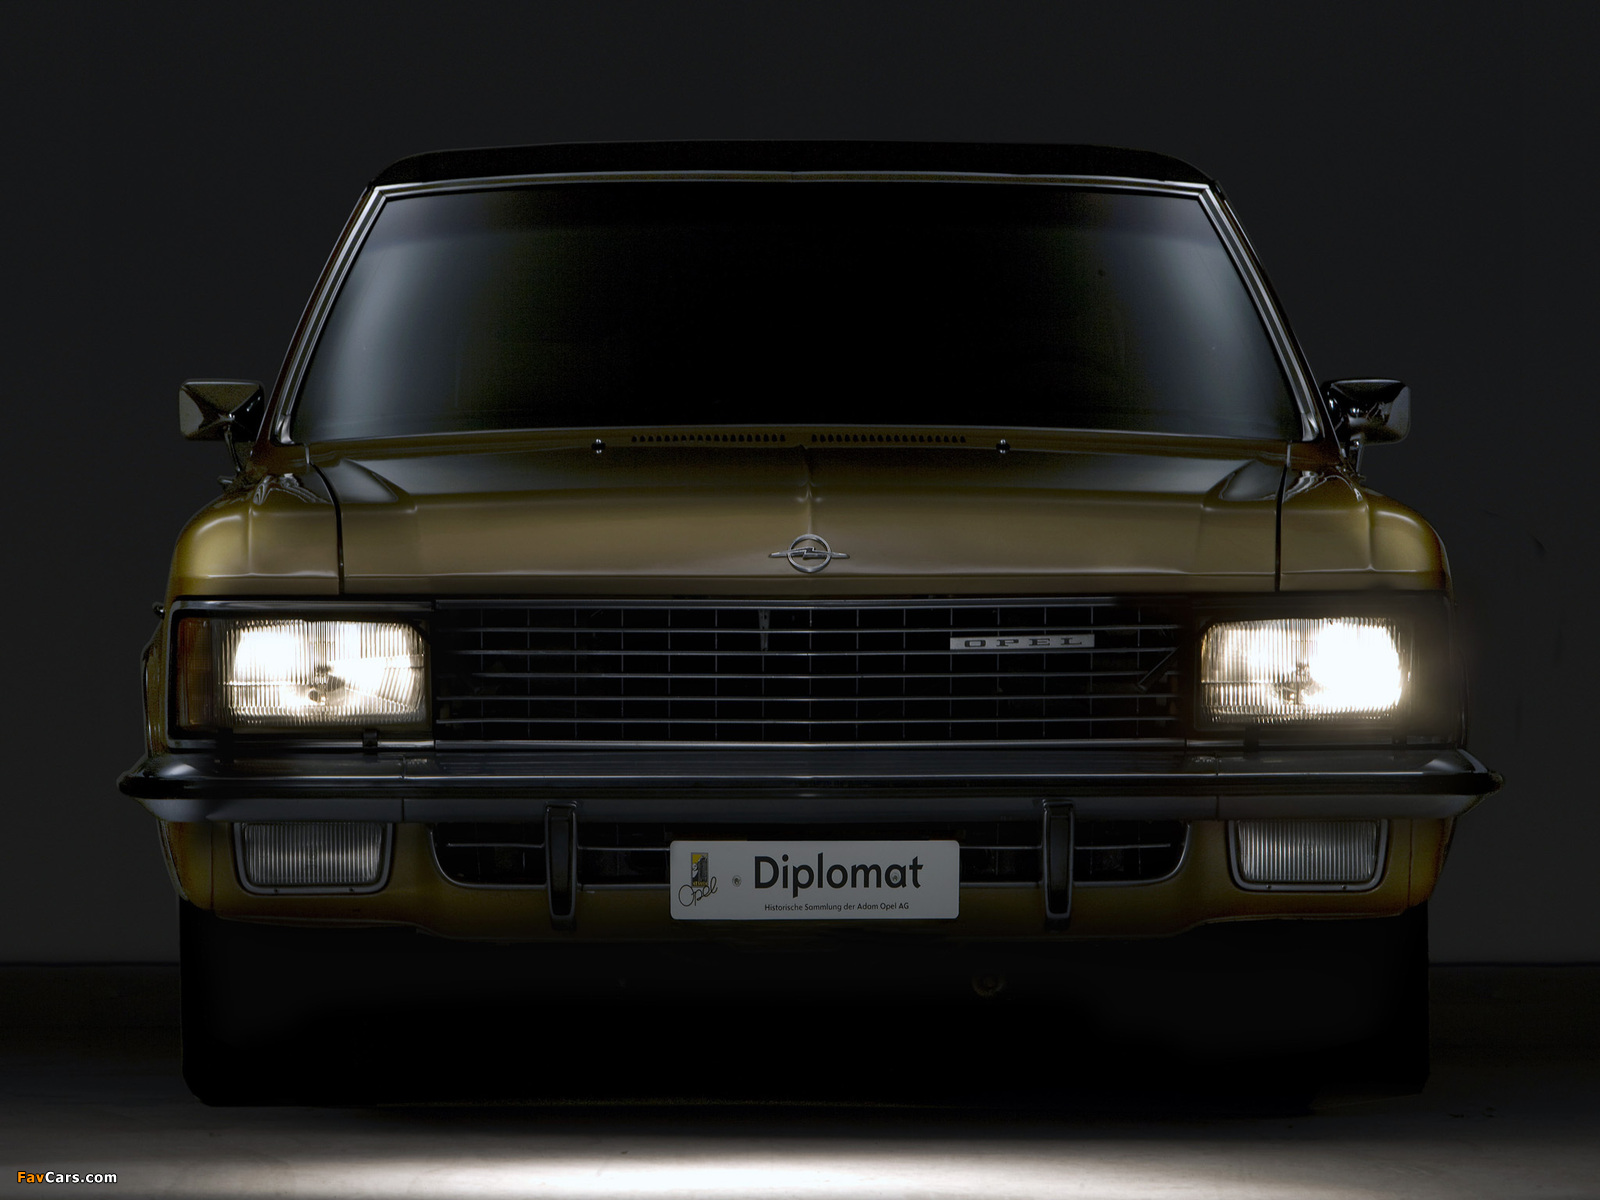 Images of Opel Diplomat (1600 x 1200)